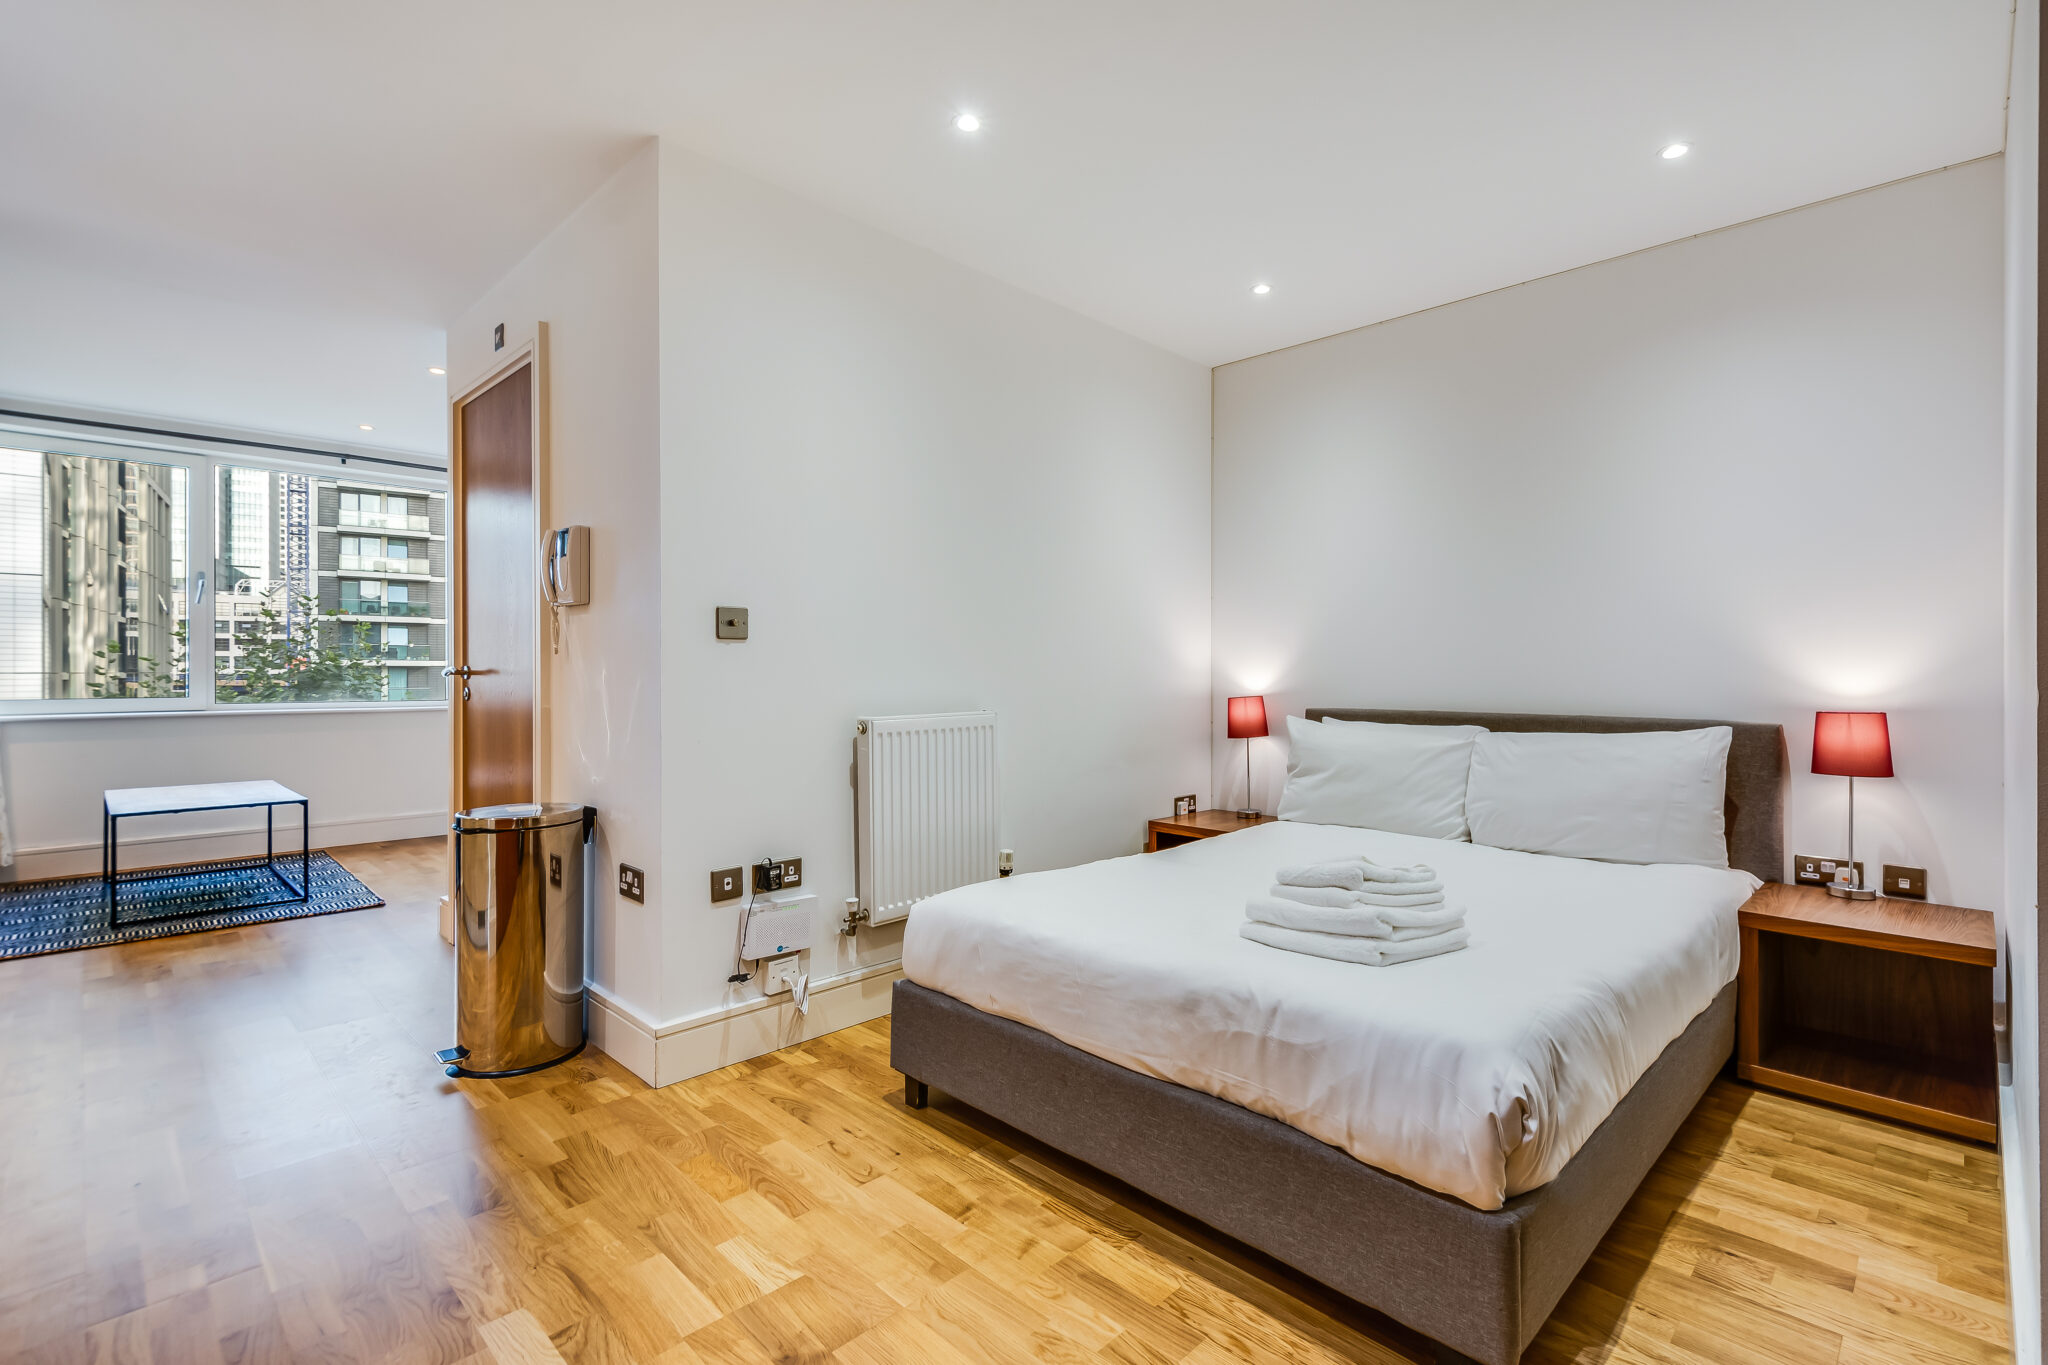 Accommodation in Canary Wharf Indescon Square.Enjoy private balconies, , and nearby amenities including Canary Wharf Shopping Centre.Book now with Urban Stay.